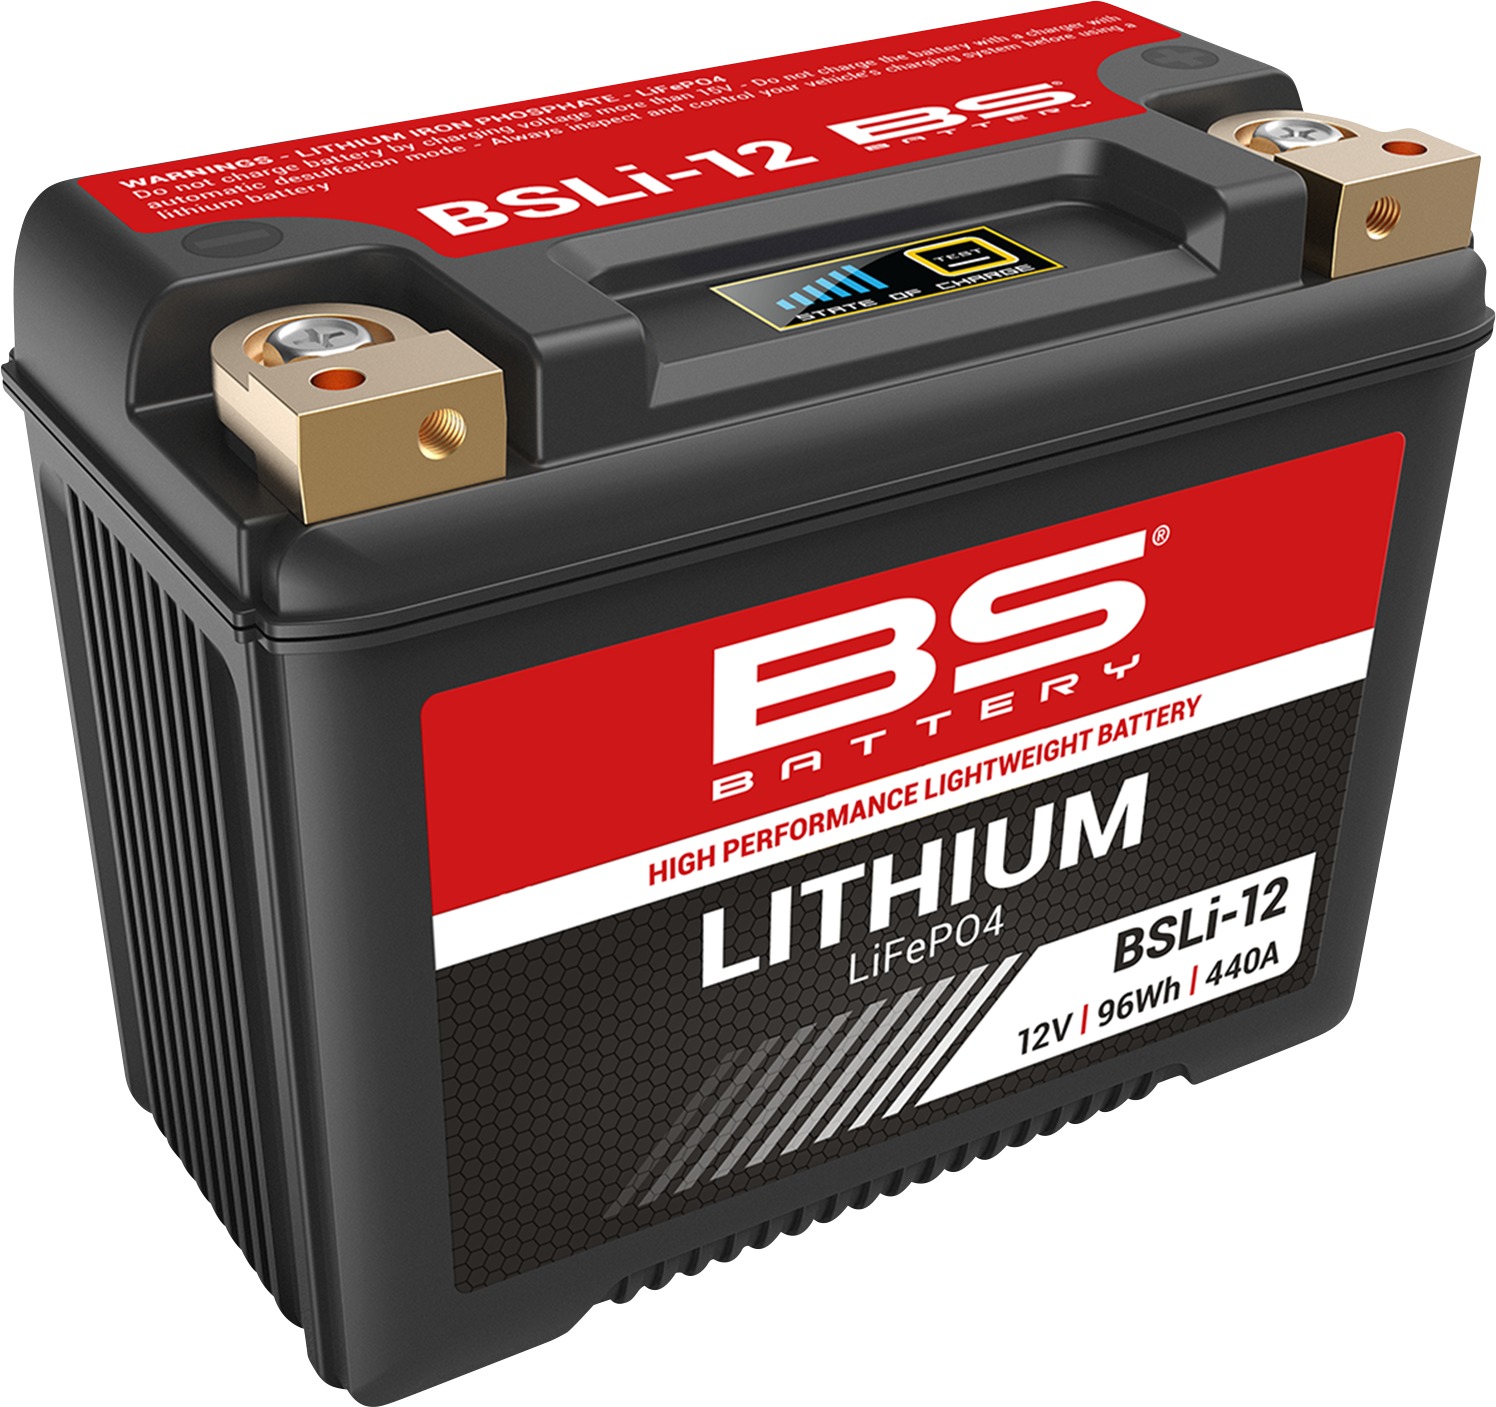 BSLI-12 Lithium Battery, 96Wh, 440 Amps - Replaces YIX30HL, YIX30L, 53030, & YB30L-B - Click Image to Close